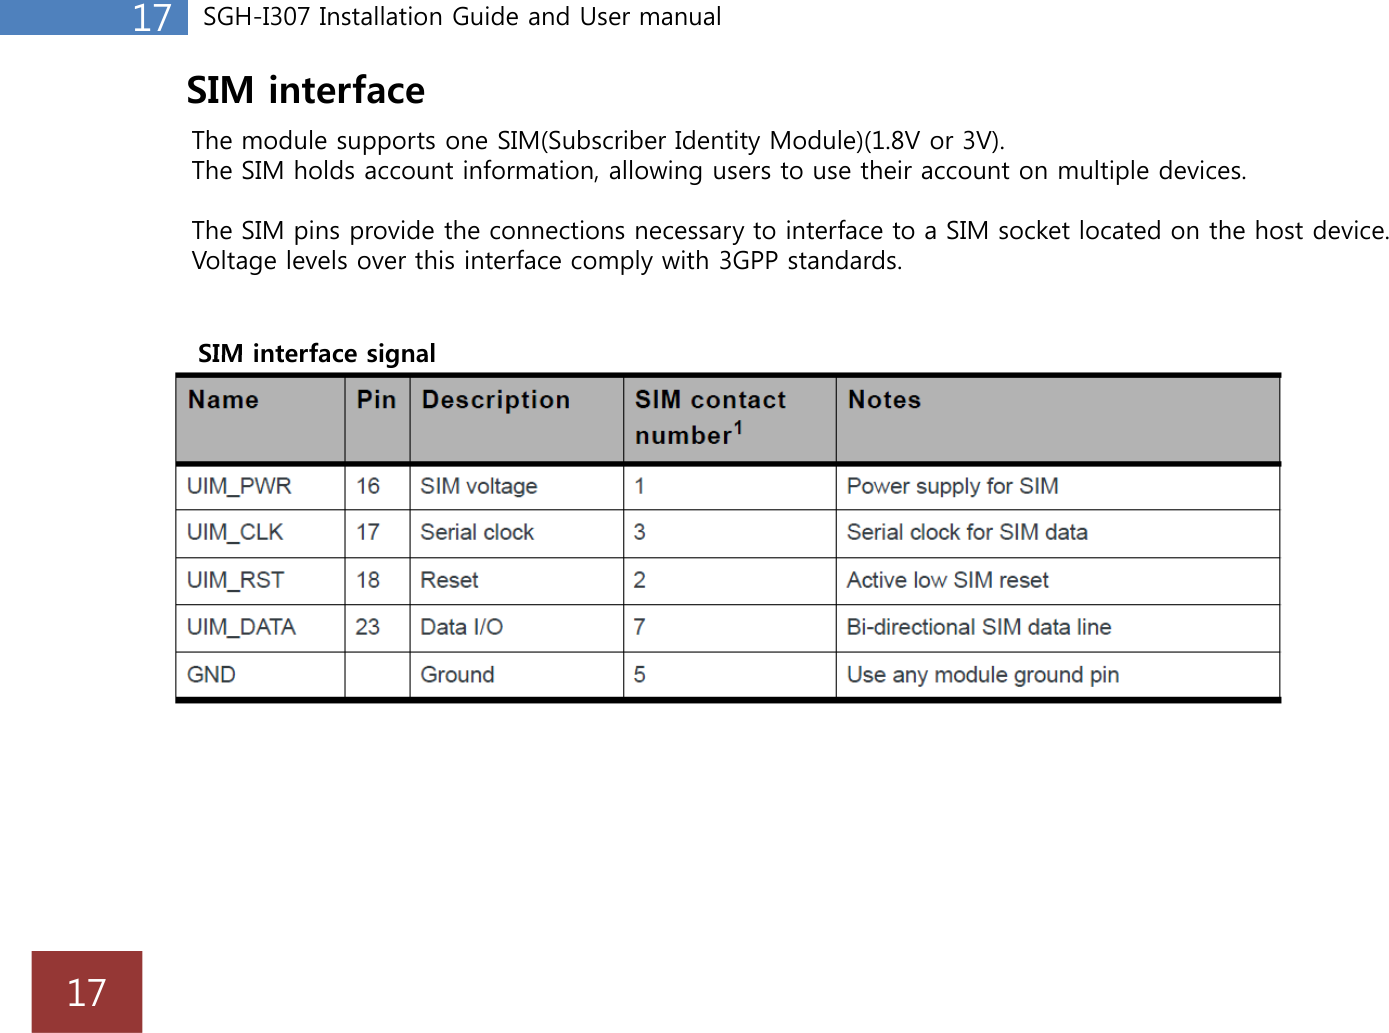 17 SGH-I307 Installation Guide and User manualSIM interfaceThe module supports one SIM(Subscriber Identity Module)(1.8V or 3V). The SIM holds account information, allowing users to use their account on multiple devices.The SIM pins provide the connections necessary to interface to a SIM socket located on the host device.Voltage levels over this interface comply with 3GPP standards.SIM interface signalSIM interface signal17